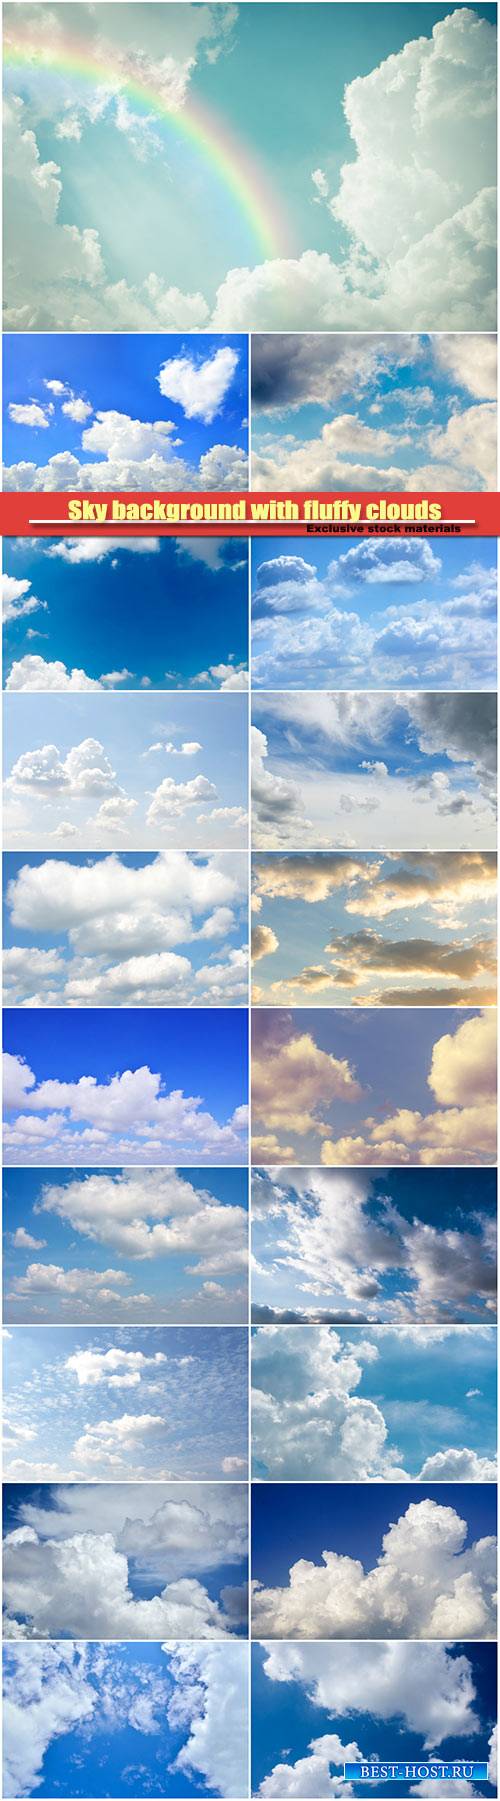 Sky background with fluffy clouds, cloudscape pattern, copy space